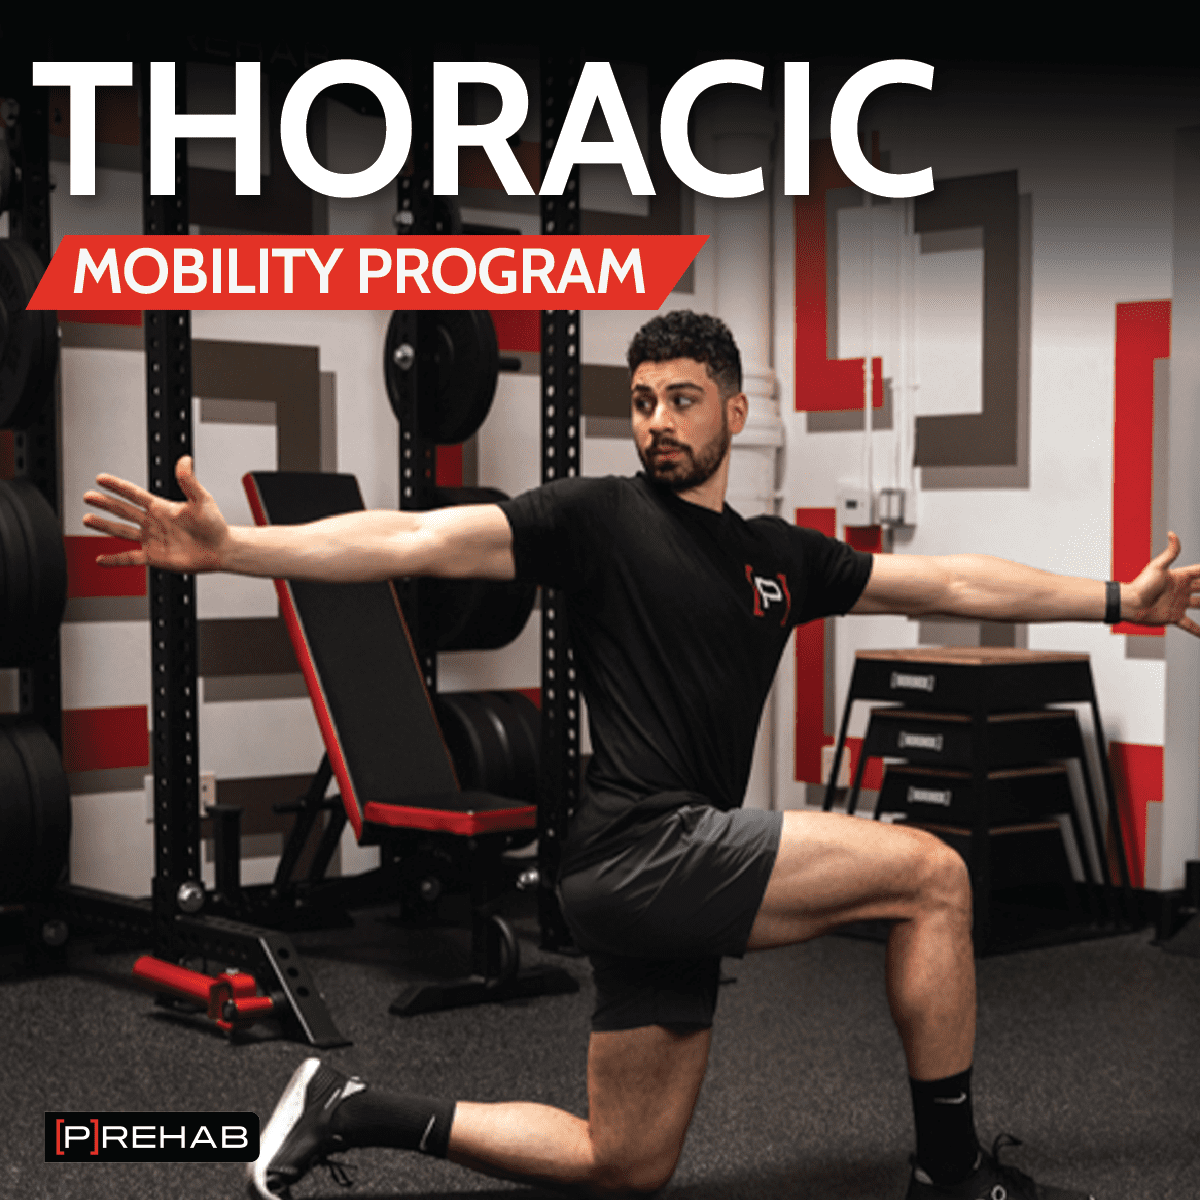 thoracic spine mobility how much should i stretch prehab guys